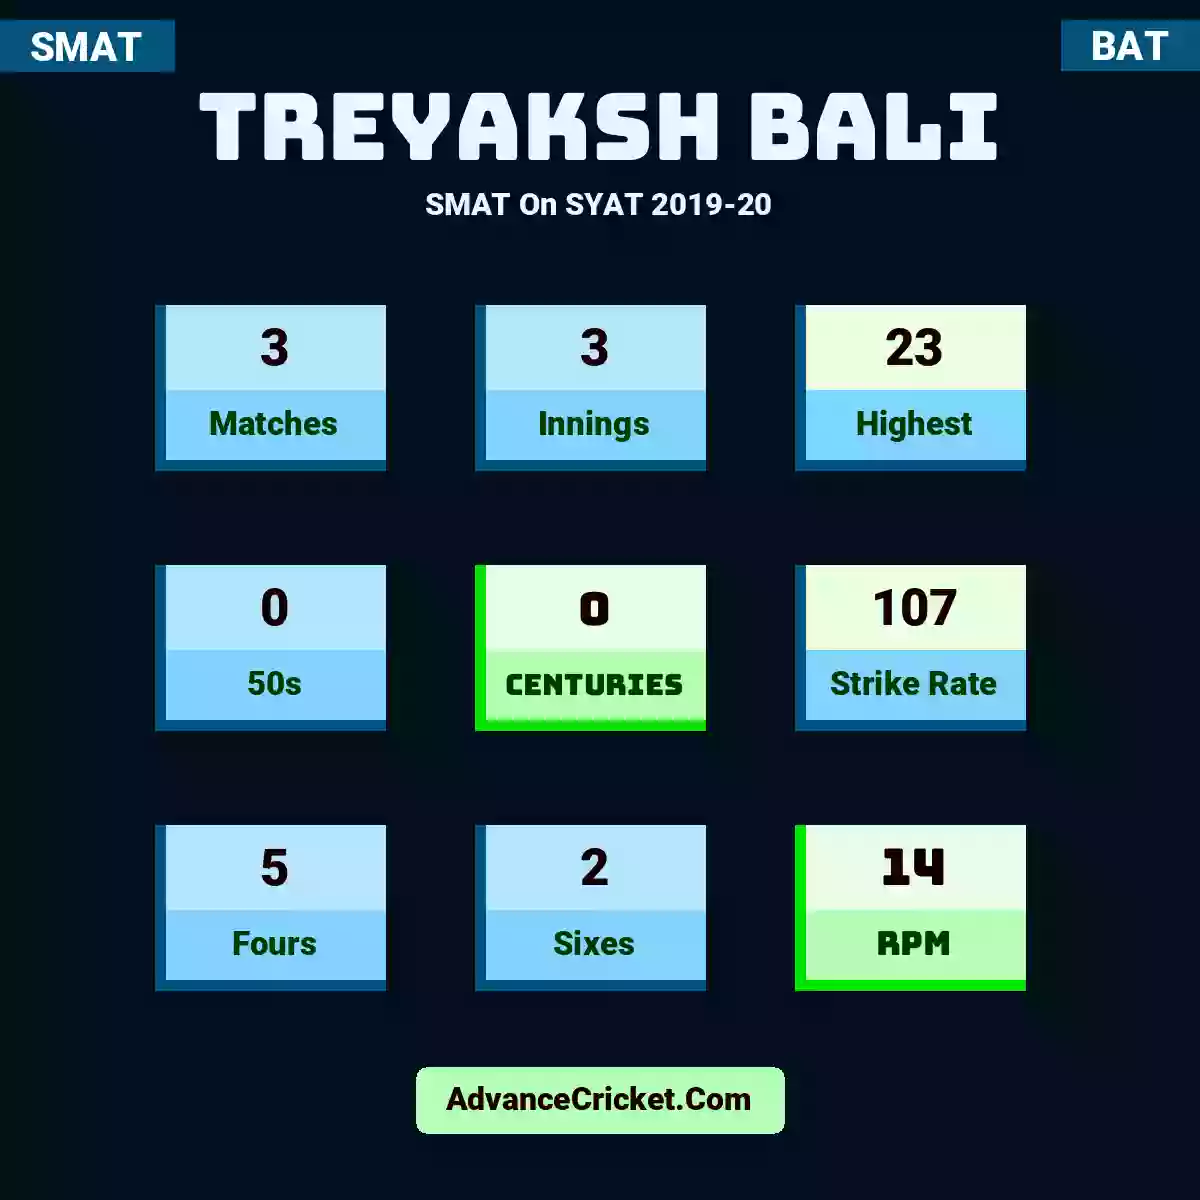 Treyaksh Bali SMAT  On SYAT 2019-20, Treyaksh Bali played 3 matches, scored 23 runs as highest, 0 half-centuries, and 0 centuries, with a strike rate of 107. T.Bali hit 5 fours and 2 sixes, with an RPM of 14.